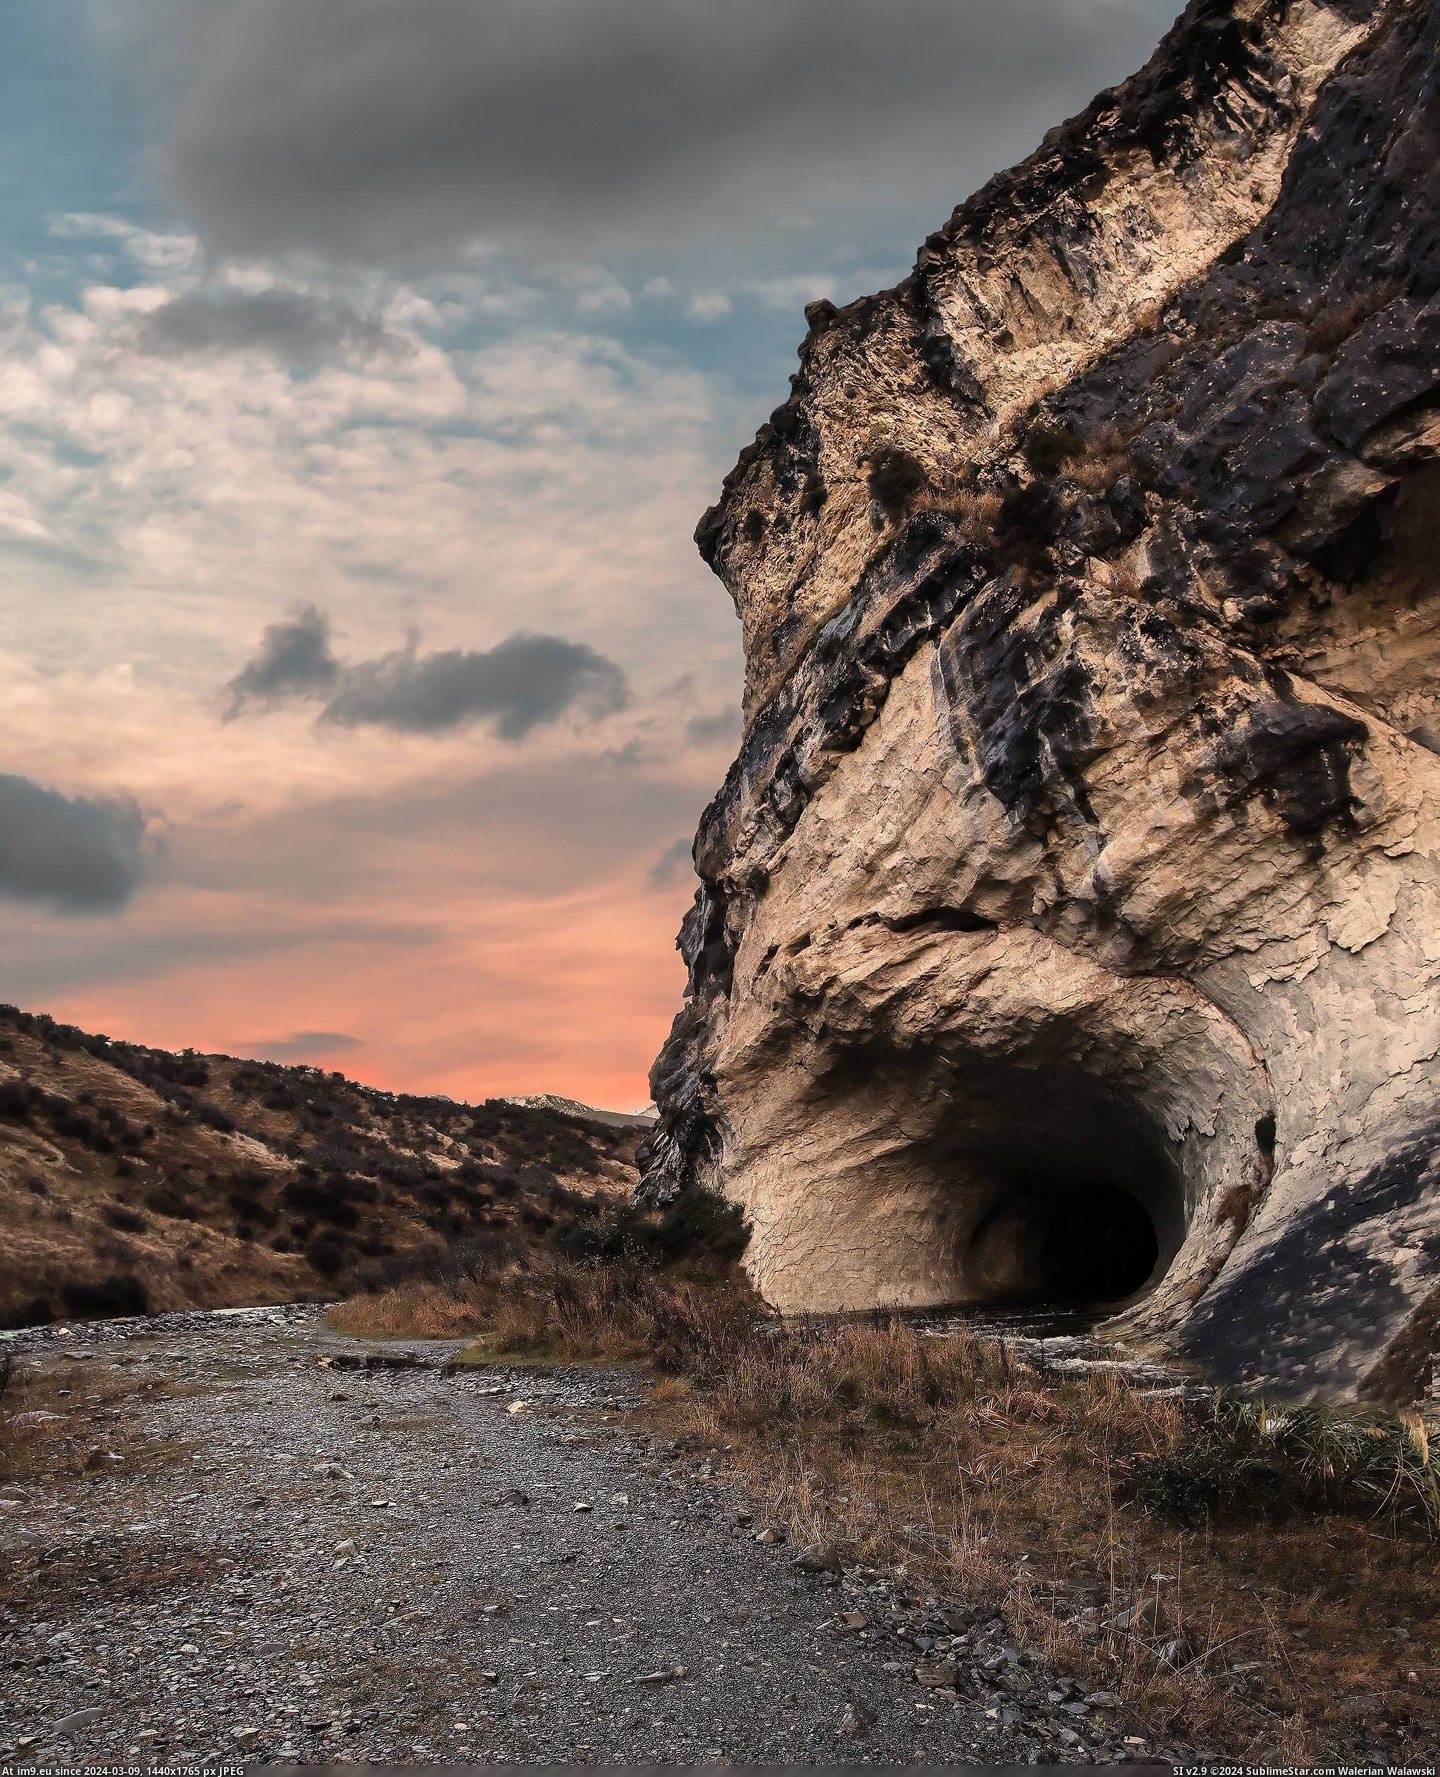 #Time #Res #Cave #Entrance #Scenic #Swallow #Stream [Earthporn] The entrance to Cave Stream looks like it's trying to swallow you - I didn't go in this time. Cave Stream Scenic Res Pic. (Изображение из альбом My r/EARTHPORN favs))